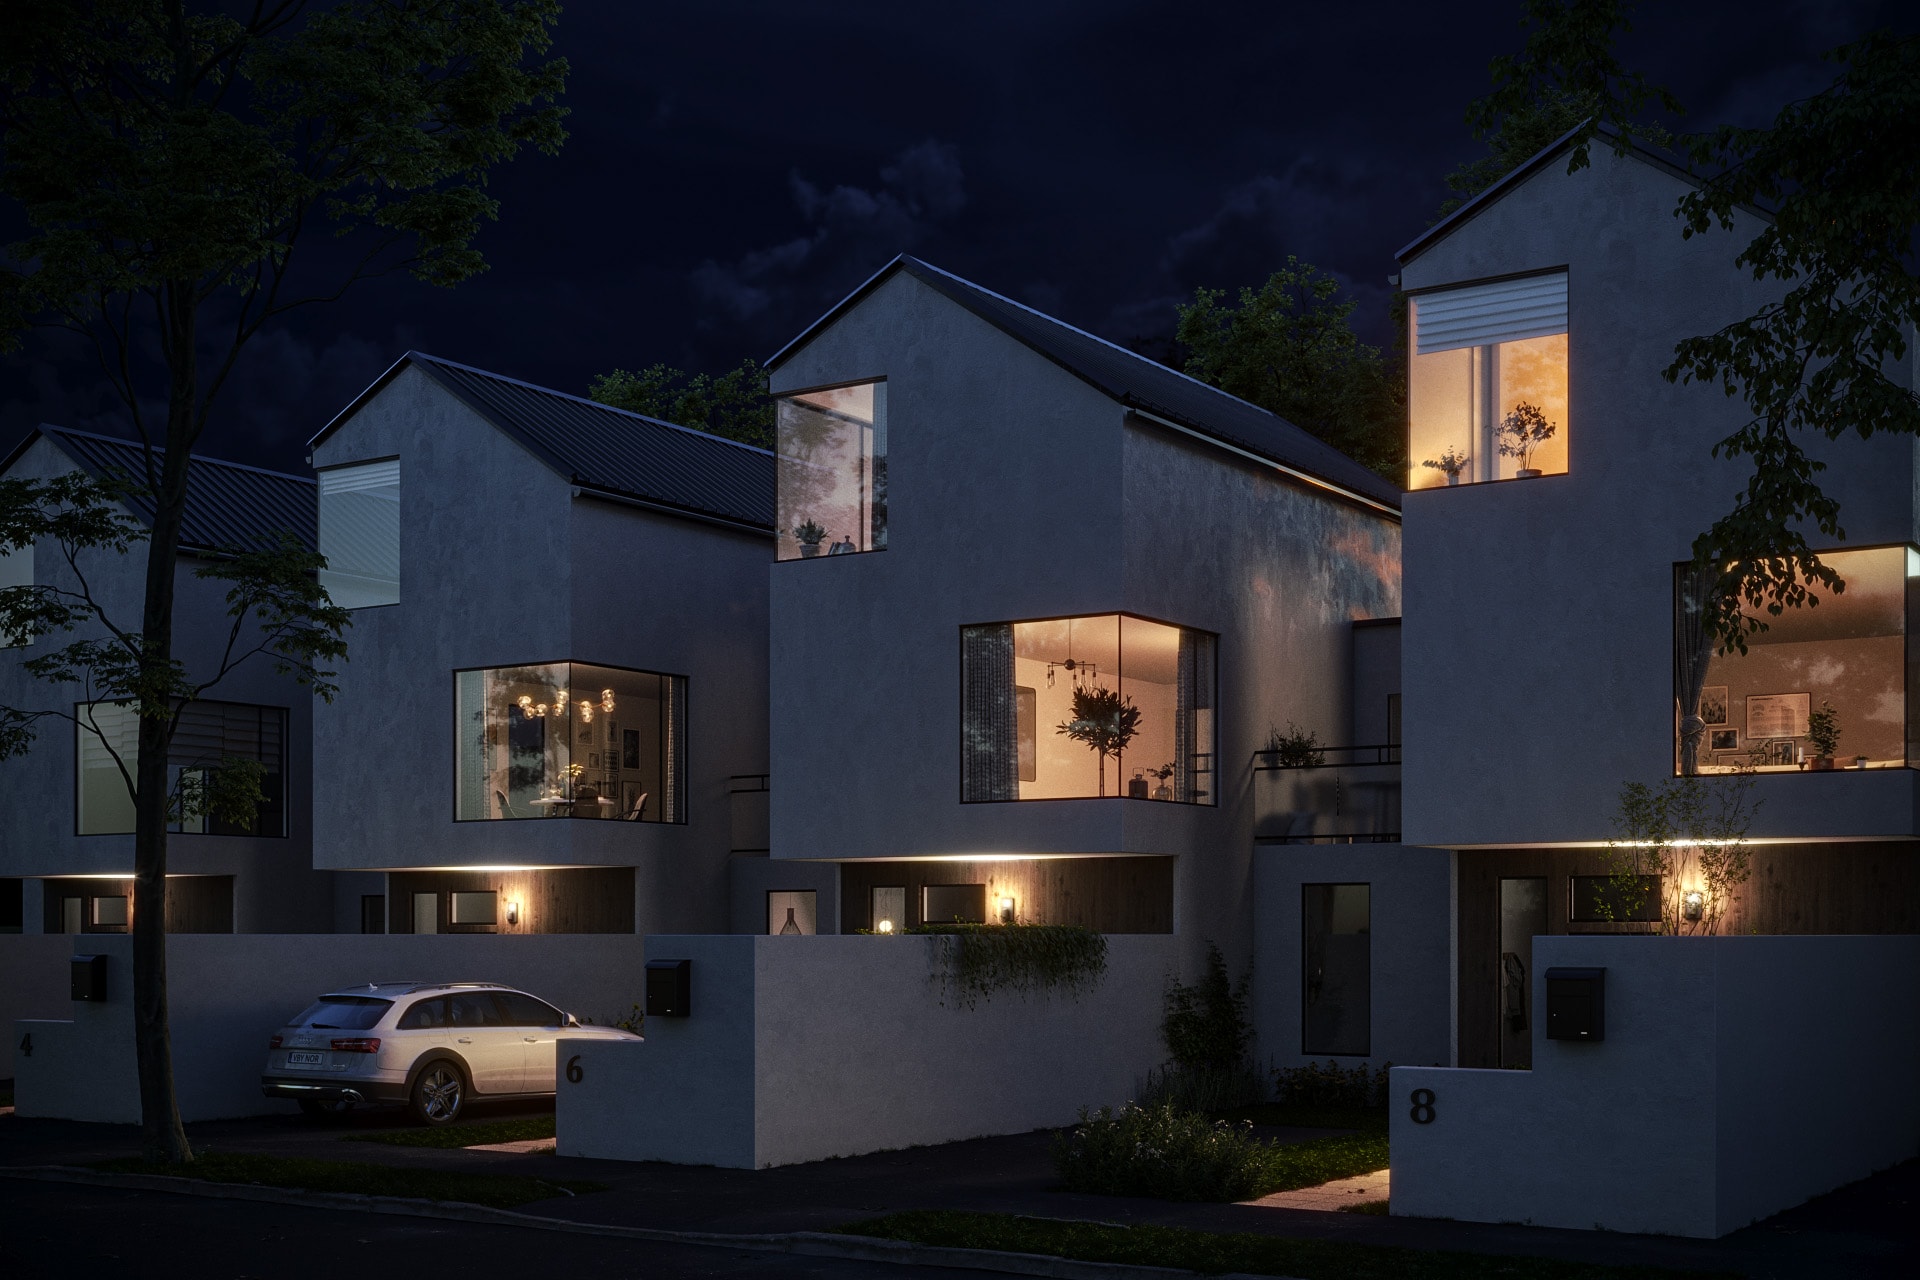 Architectural rendering of a modern townhouse at night